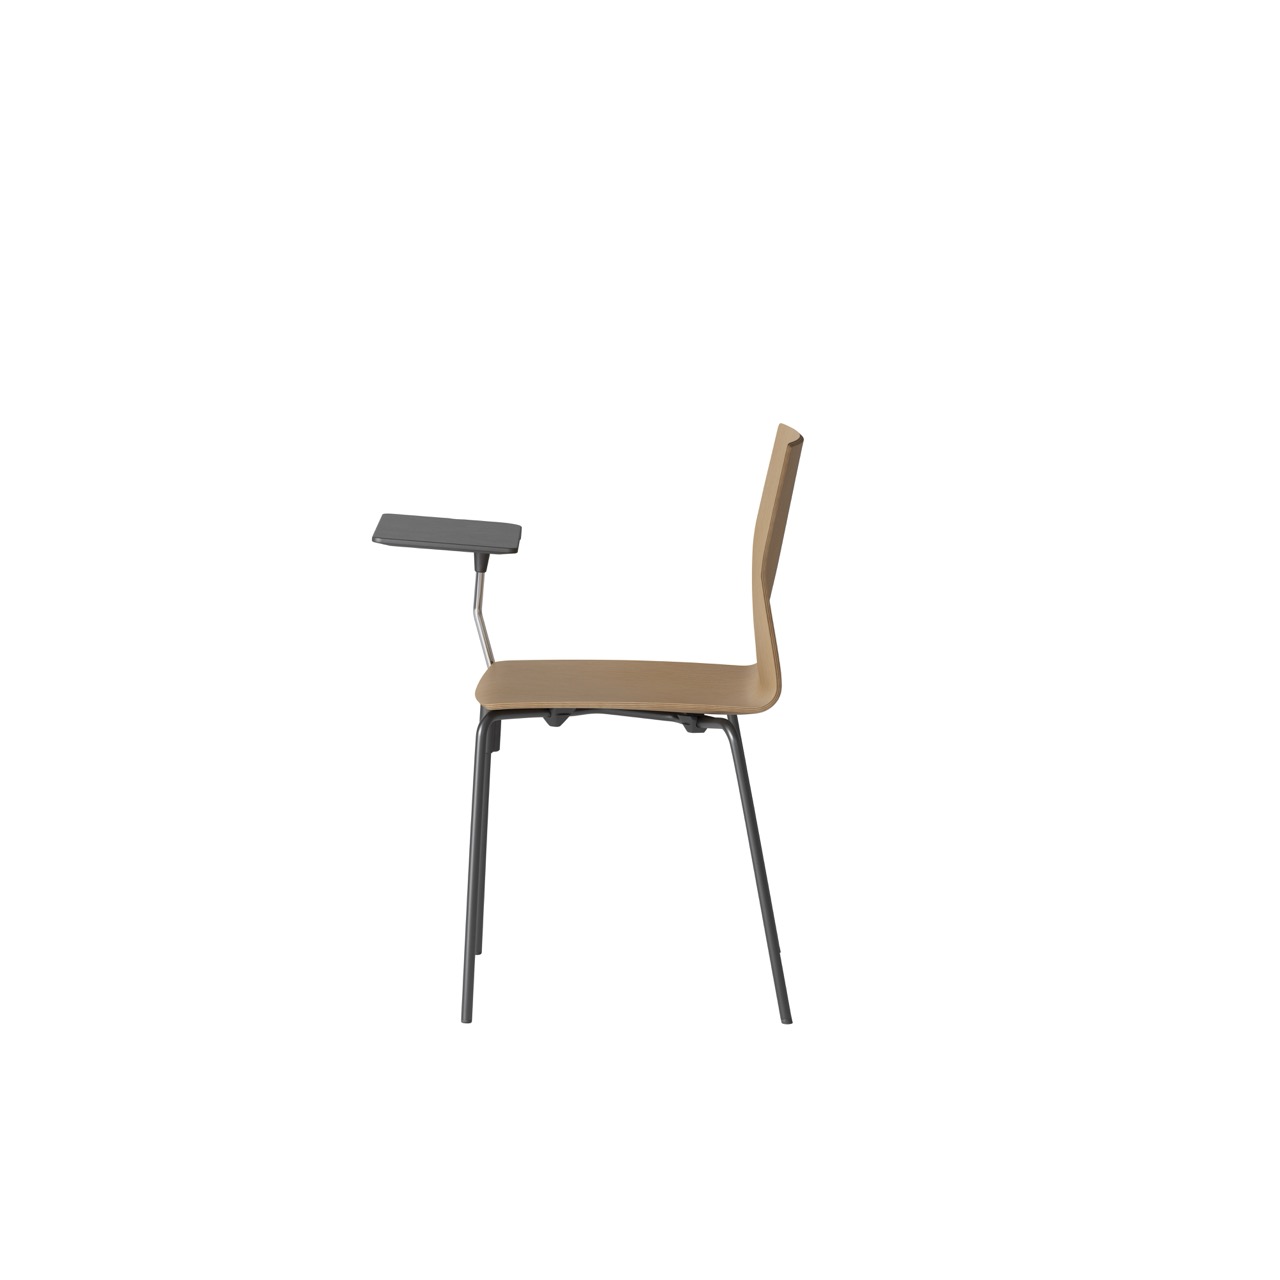 OCEE&FOUR – Chairs – FourCast 2 Four – Veneer shell - Inno Note - Packshot Image 2 Large